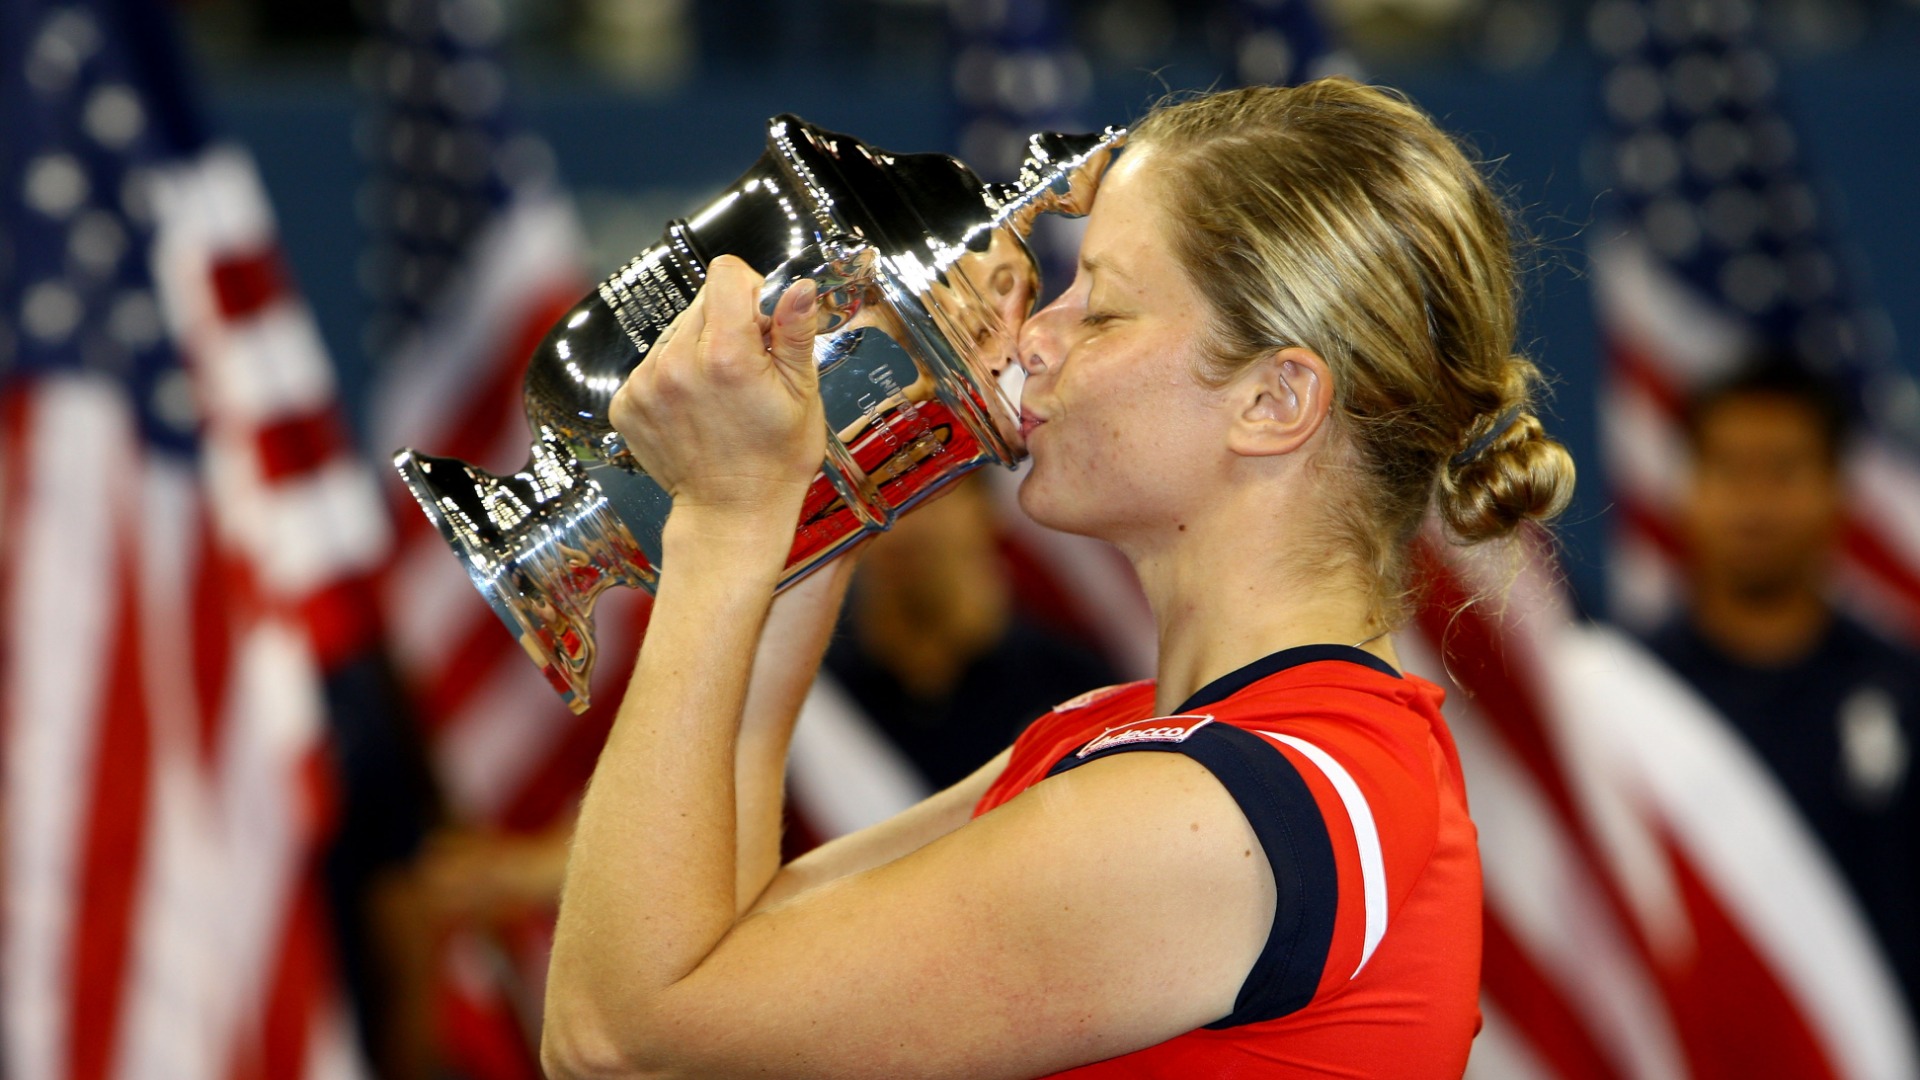 After seven years away, Kim Clijsters has announced plans for a sensational return to tennis. We look at the other great WTA Tour comebacks.